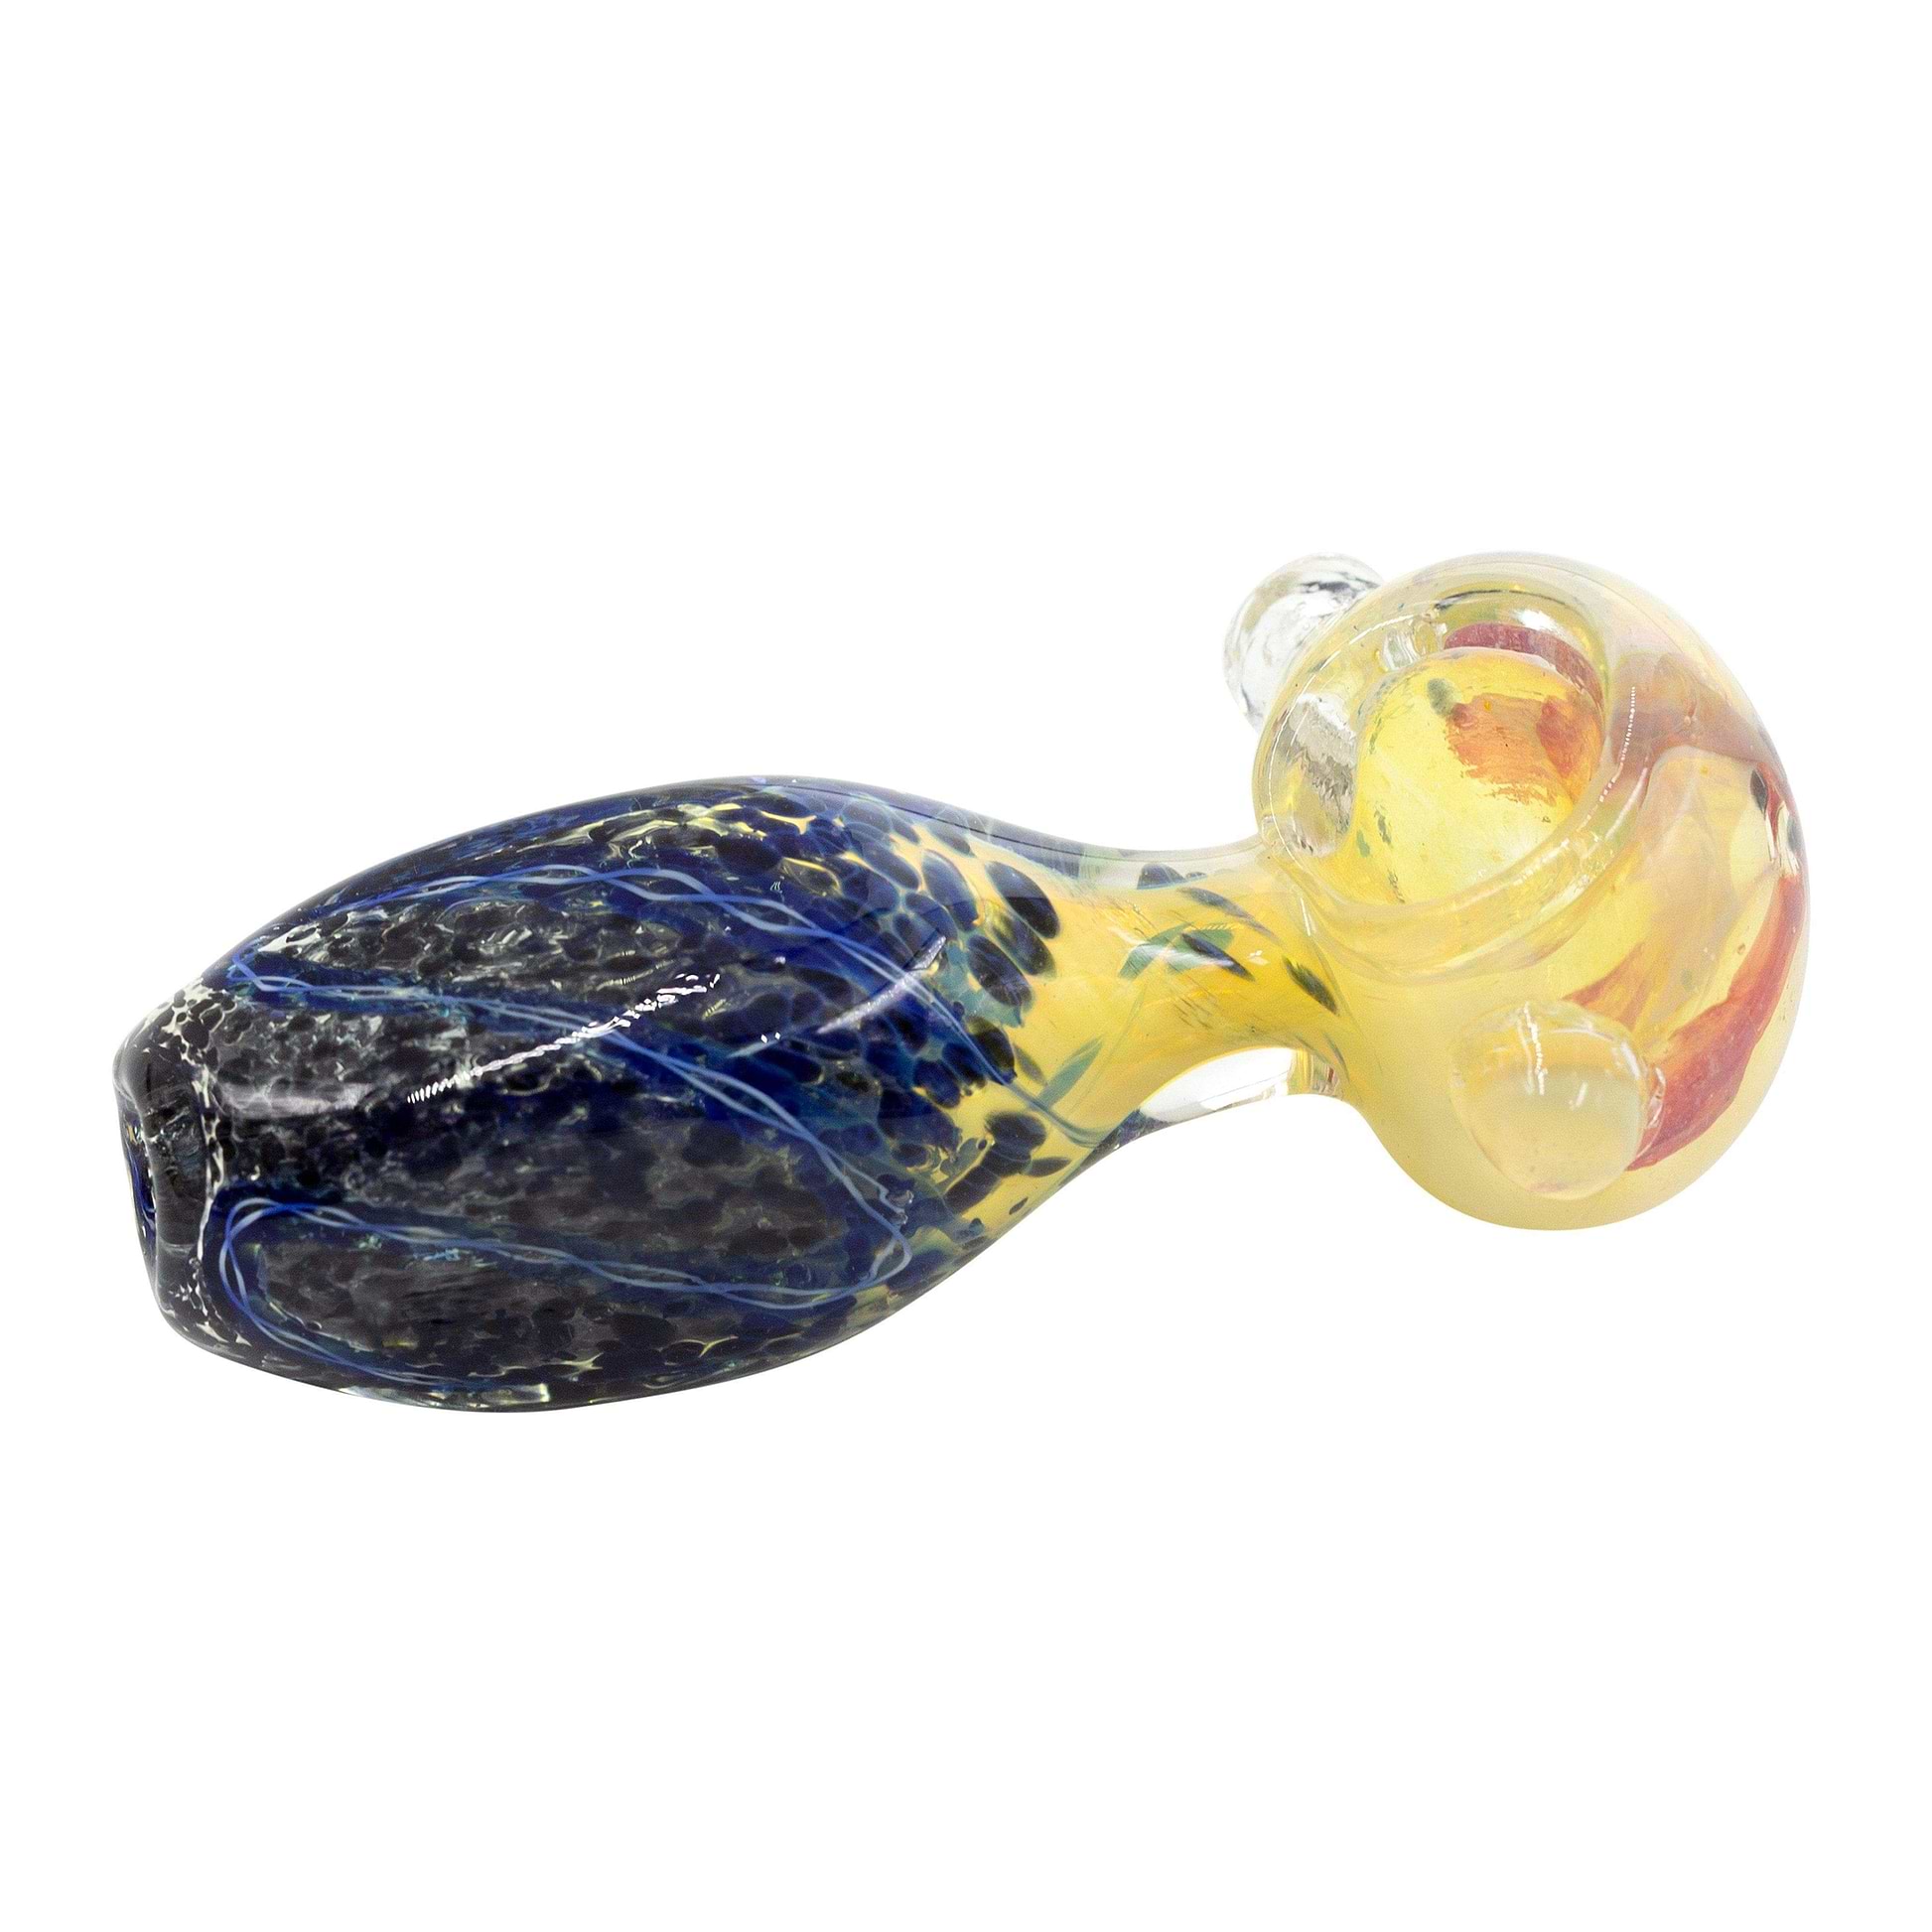 All Squared Up Pipe - 4.5in Black and Blue